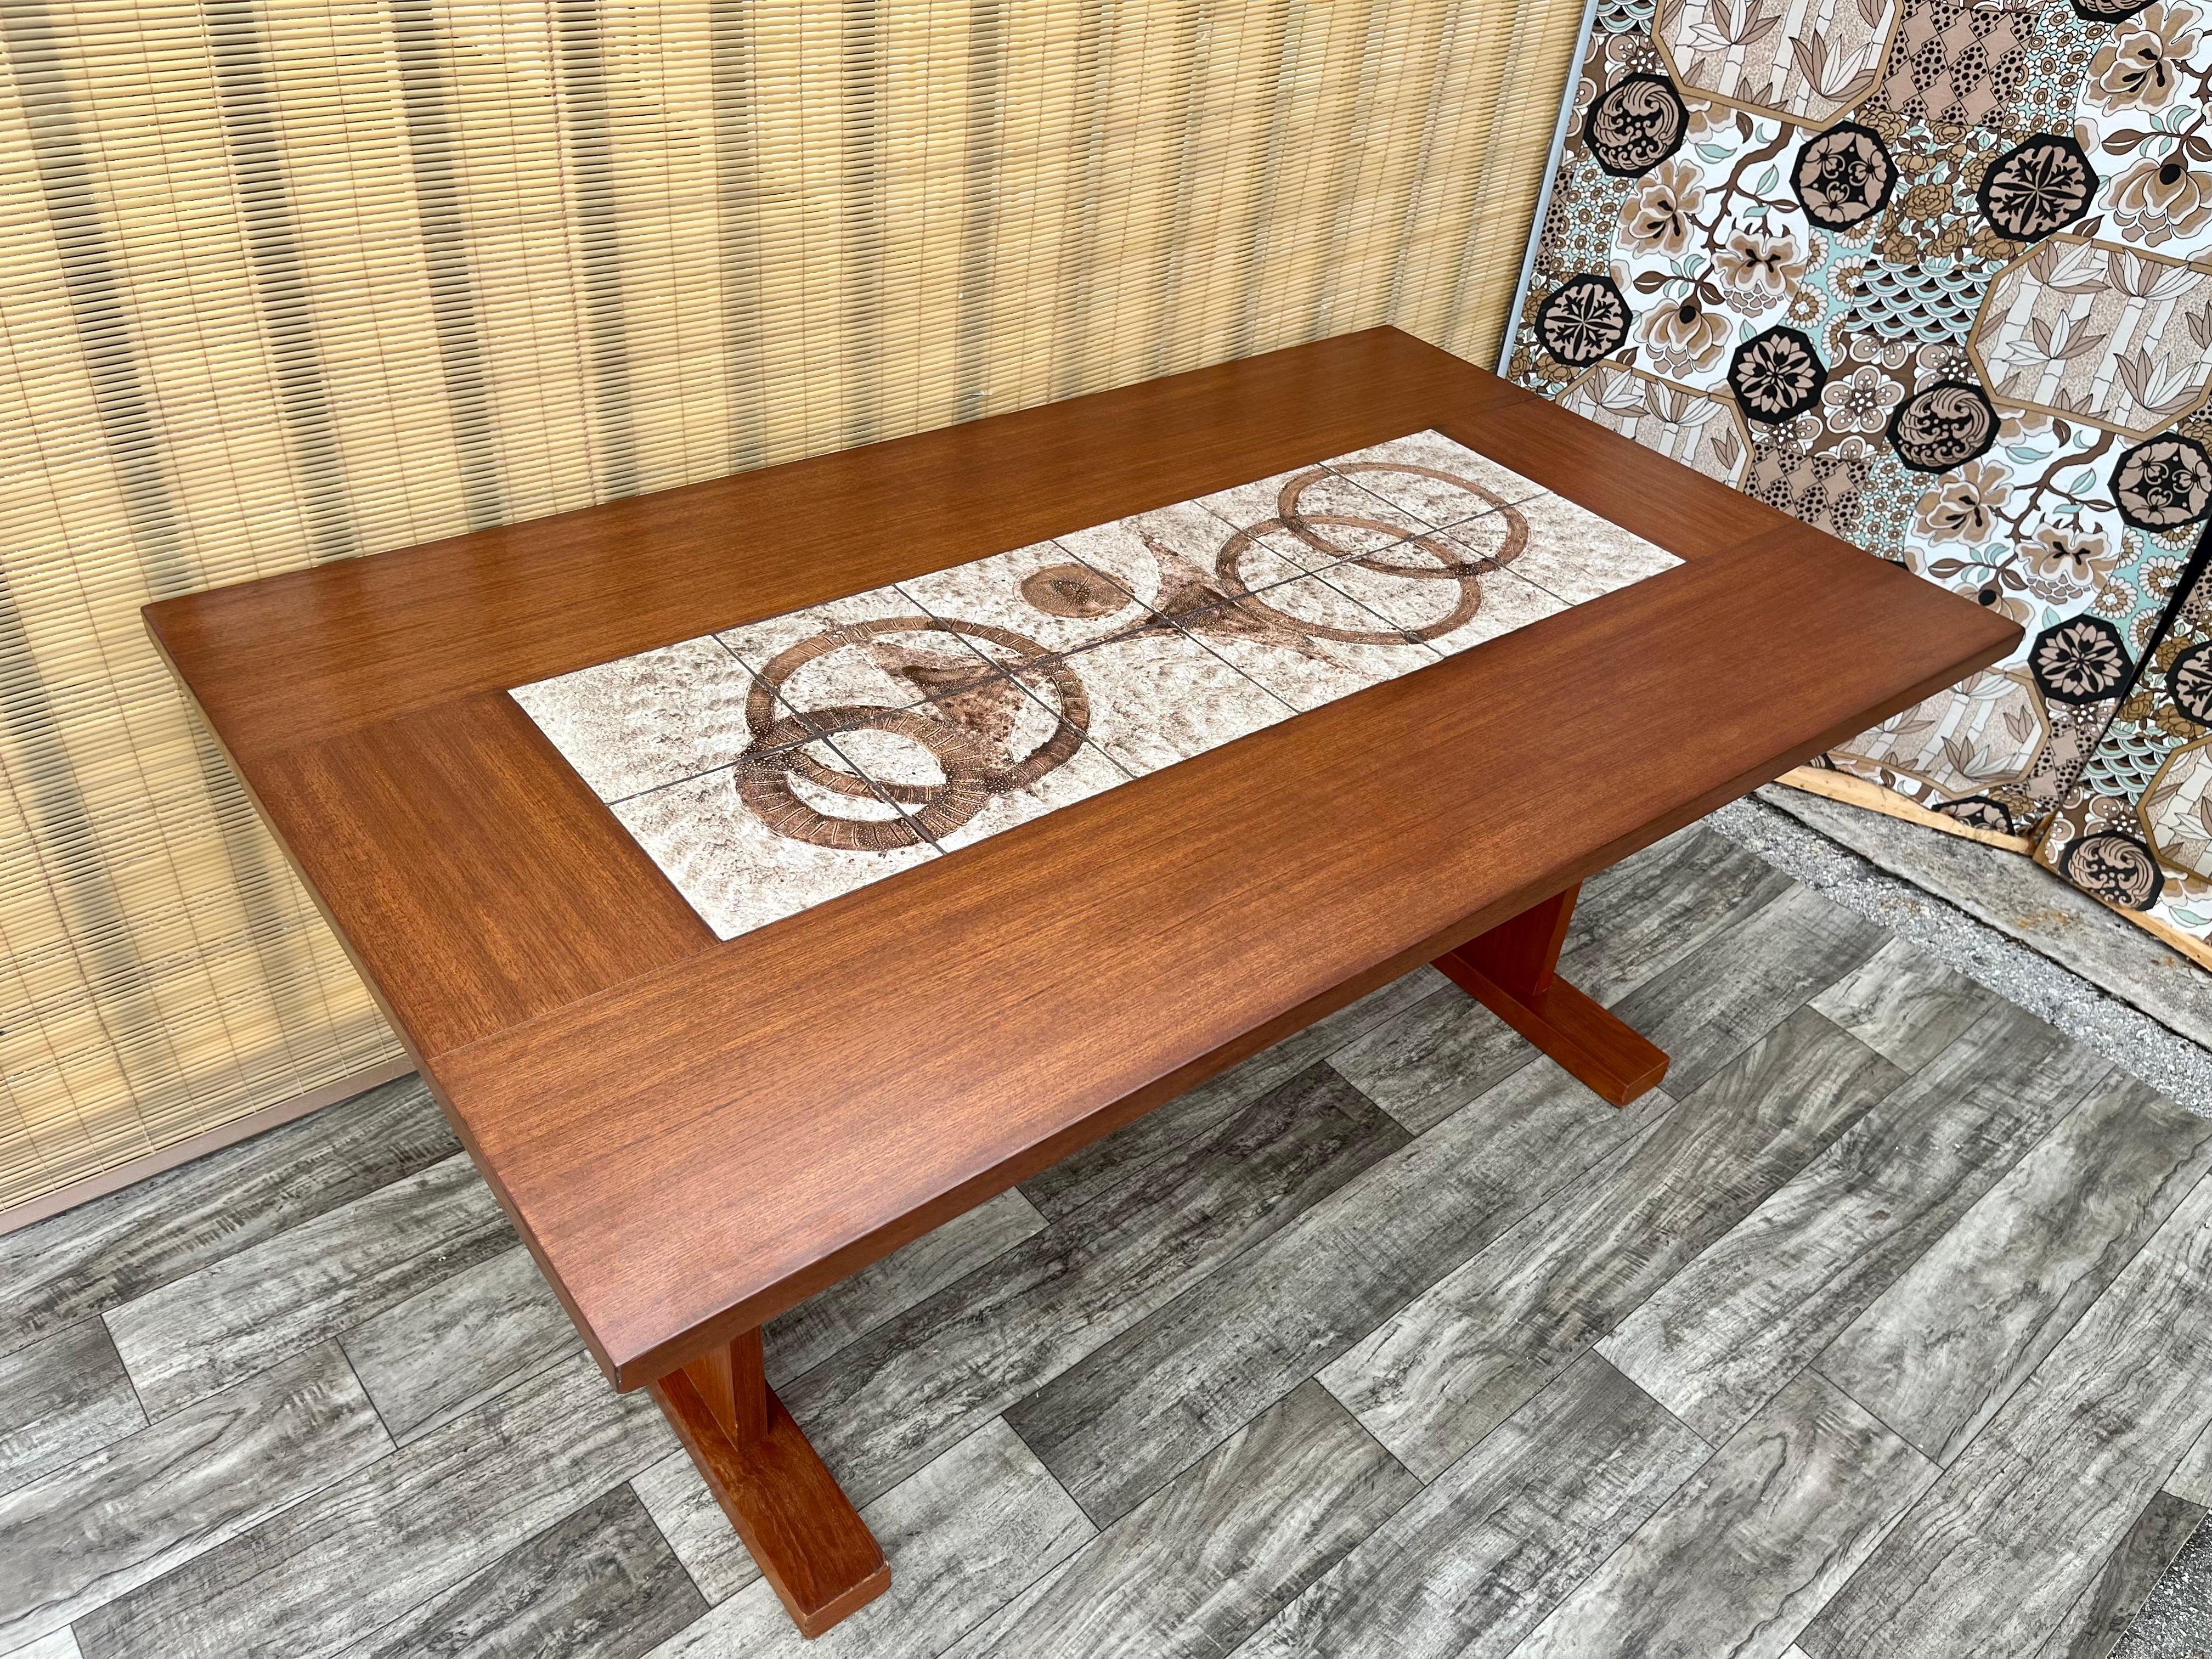 Mid Century Modern Danish Dining Table With Ceramic Tile Inlay. Circa 1970s In Good Condition For Sale In Miami, FL